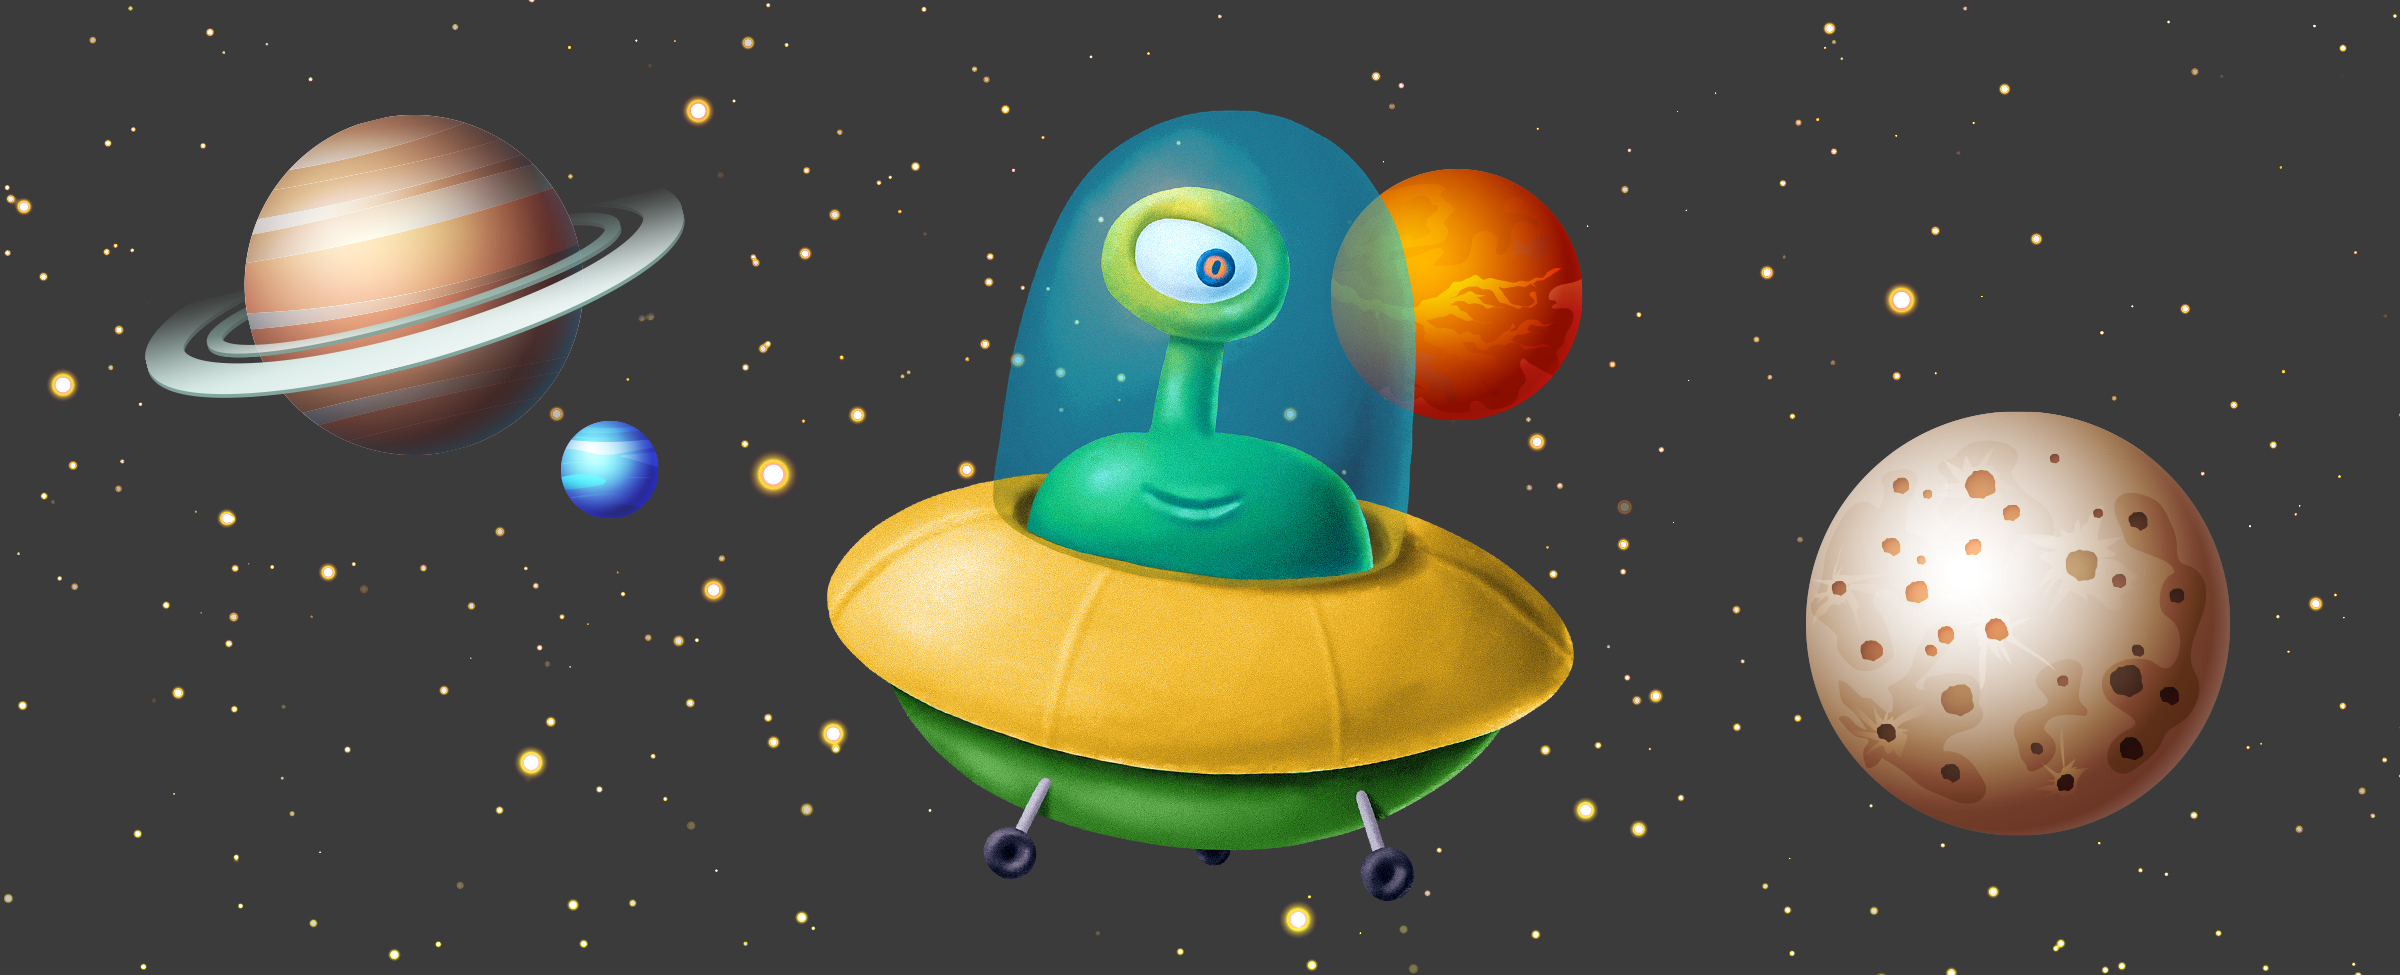 Do we have a game about UFOs? Think you know this one? Read on to find the answer.